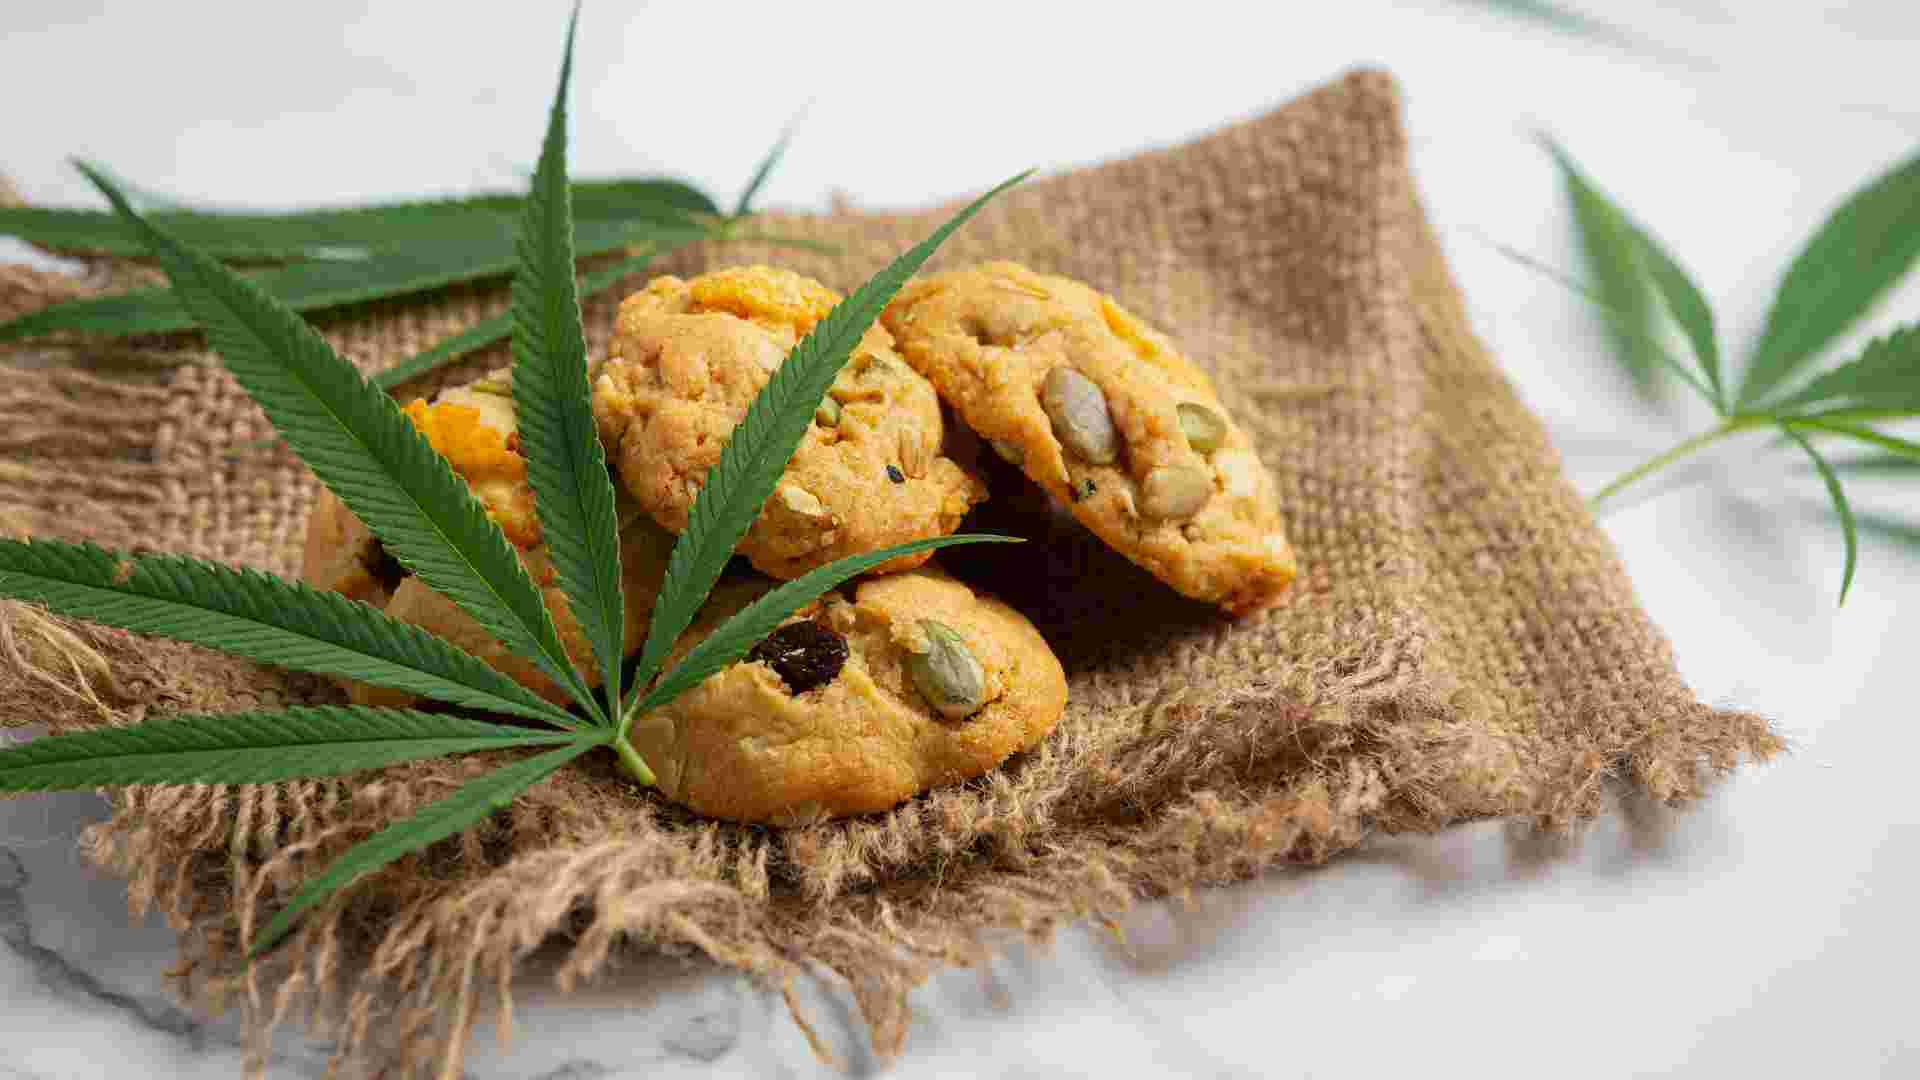 6 creative ways you can improve your edibles in mississauga